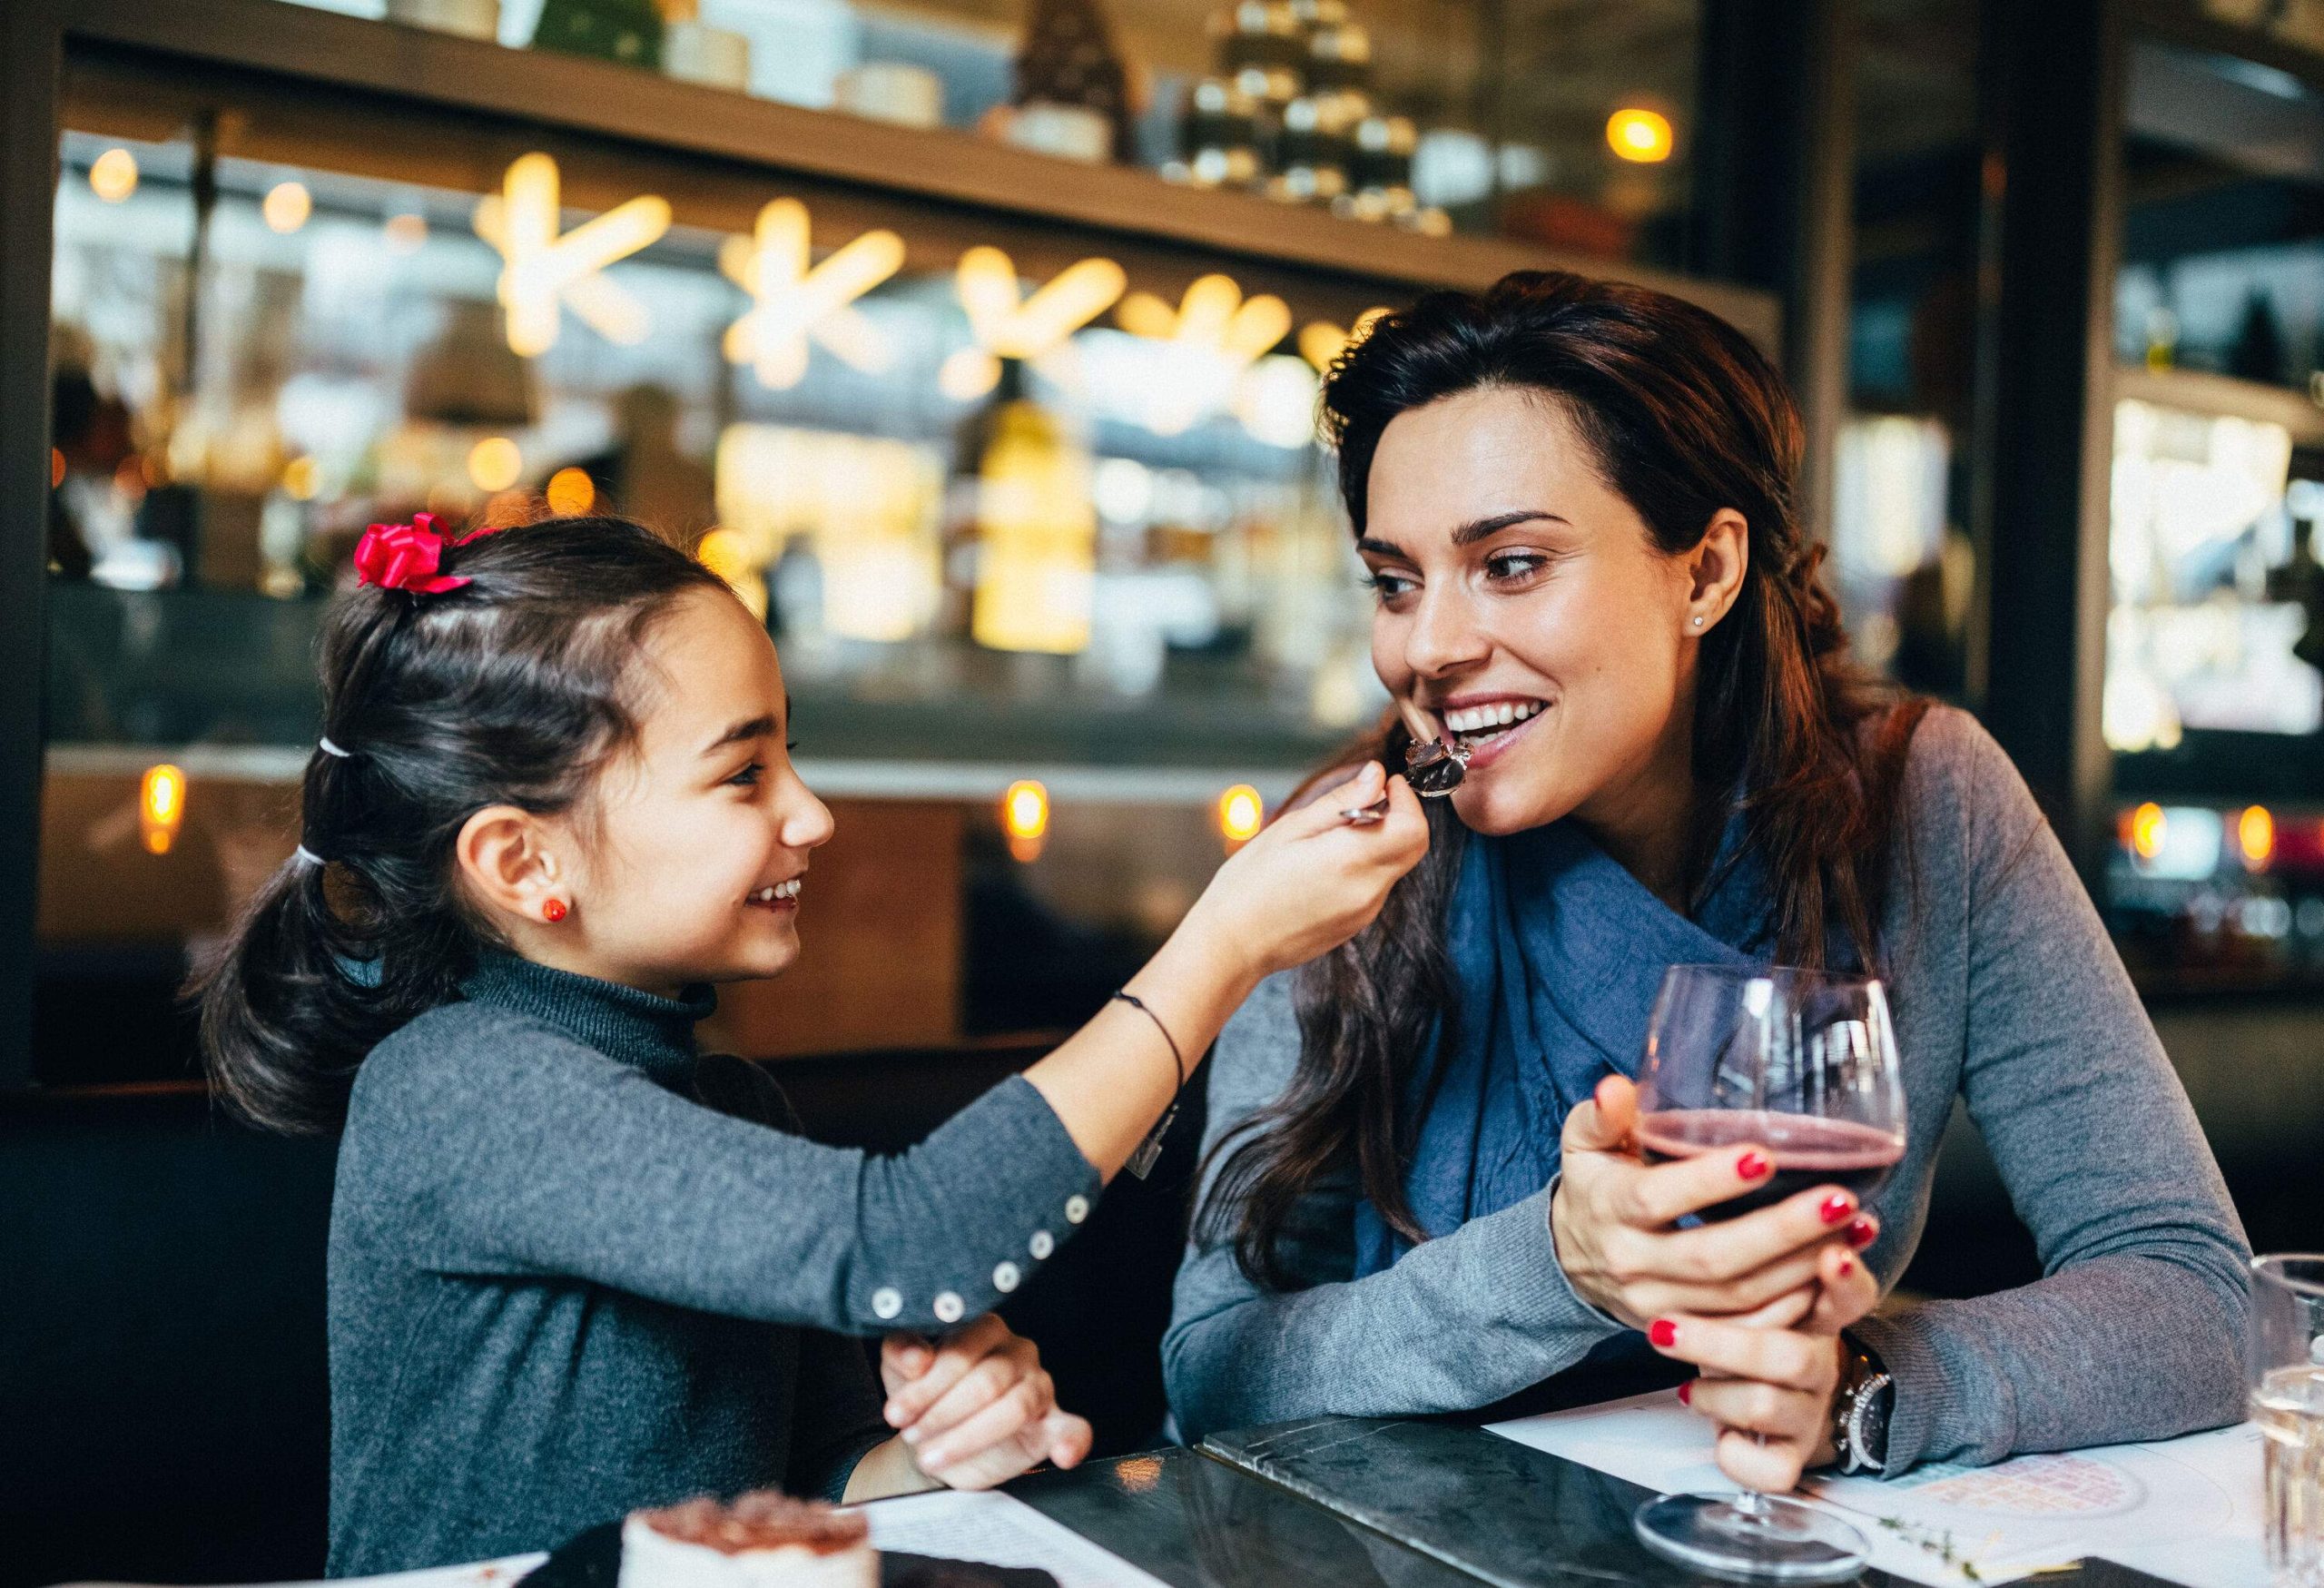 A happy mother and daughter share a dessert at a restaurant.